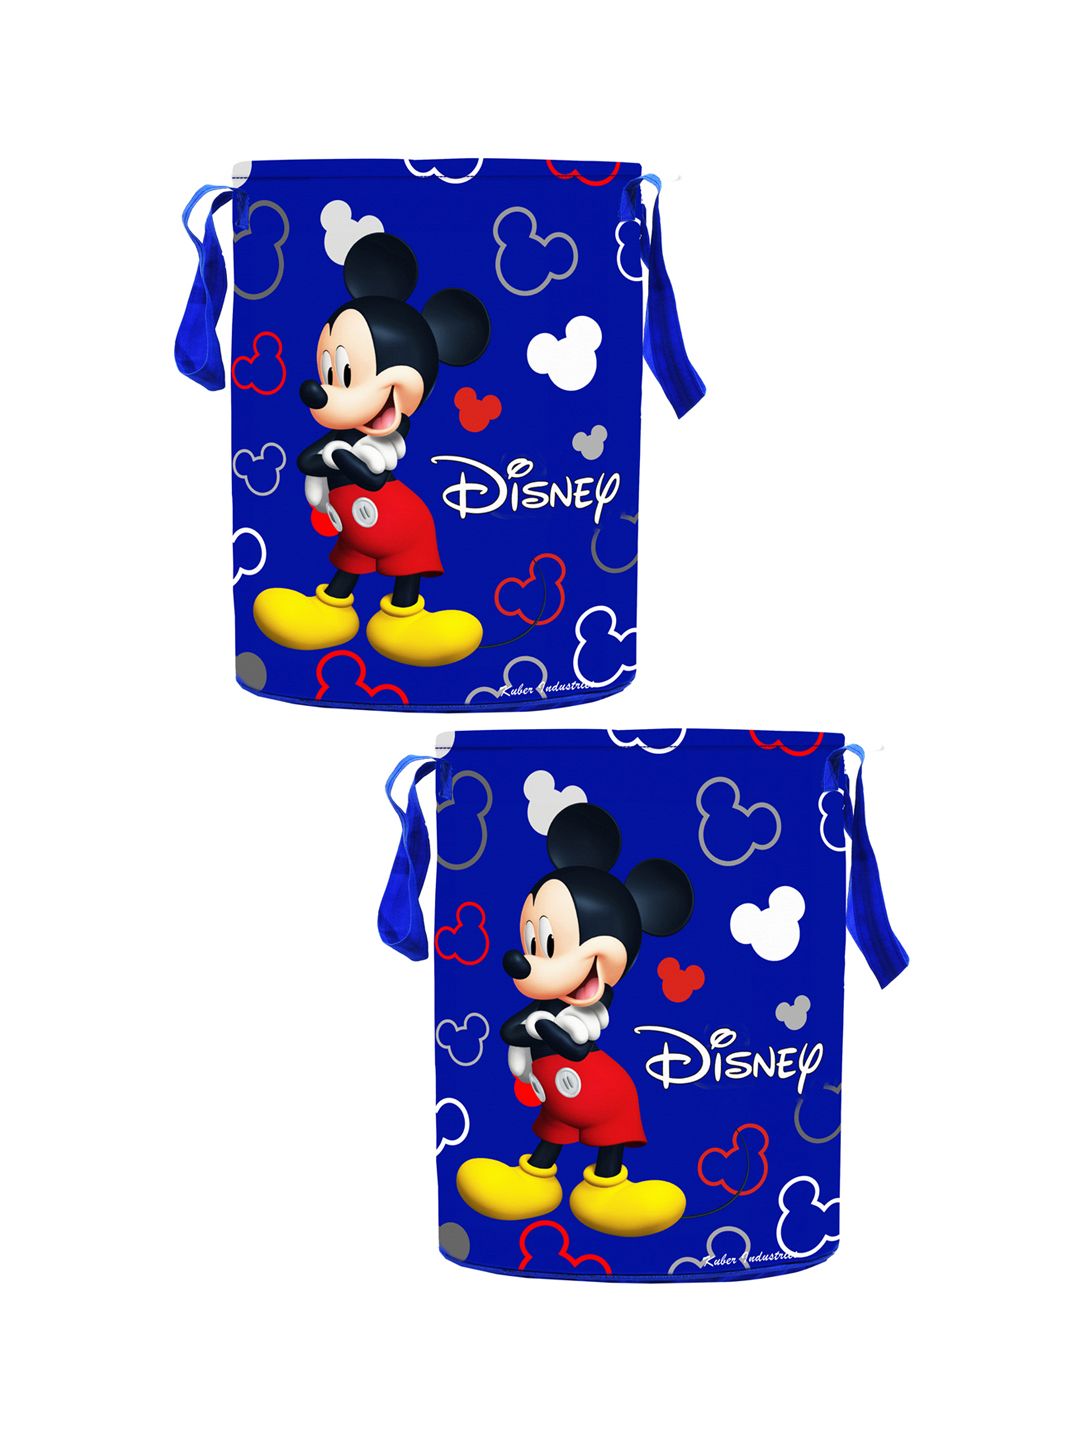 Kuber Industries Set Of 2 Blue & Red Disney Printed Waterproof Cotton Laundry Bags 45 L Price in India